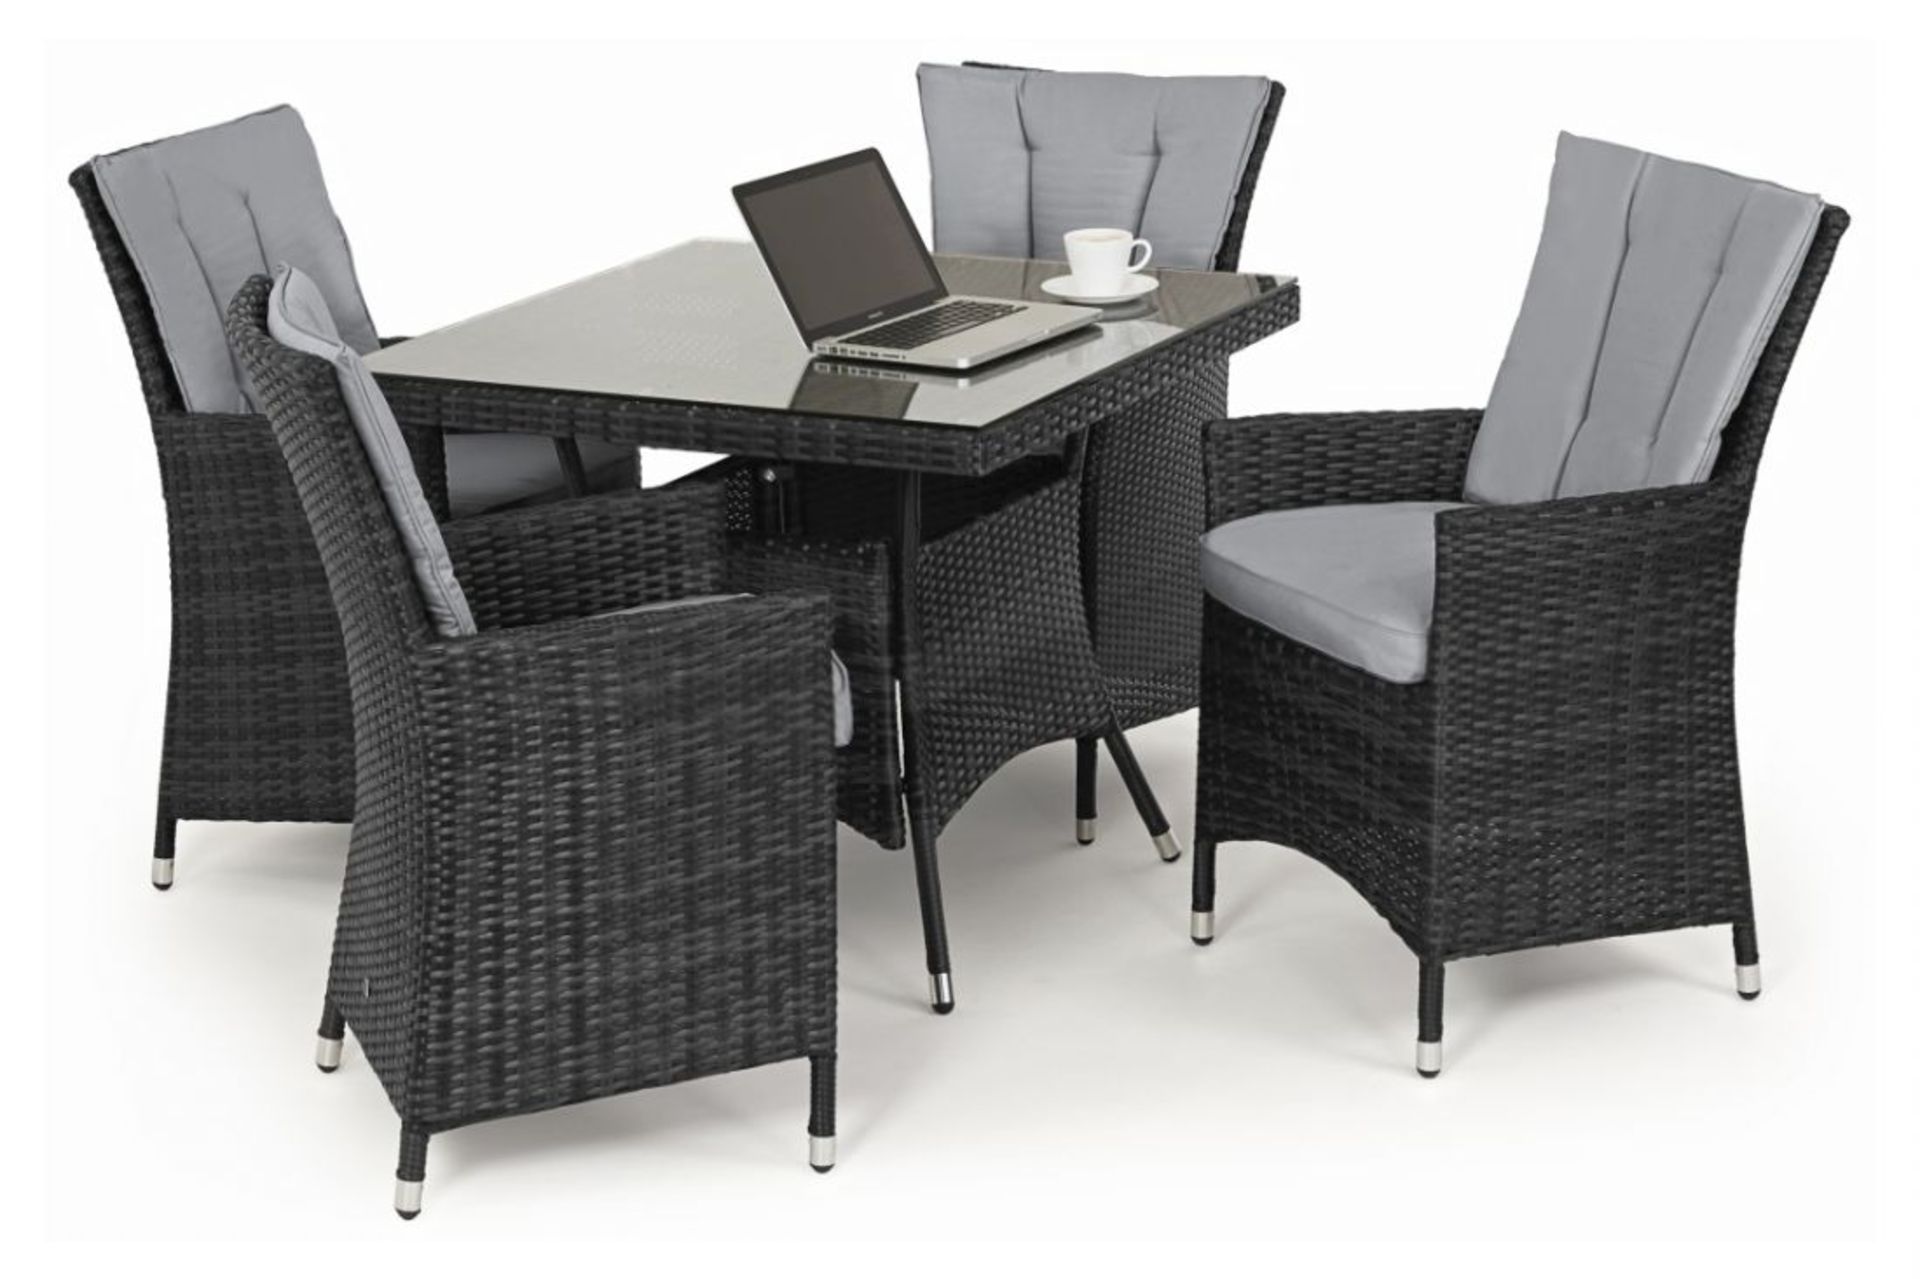 Rattan LA 4 Seat Square Dining Set With Parasol (Grey) *BRAND NEW* - Image 2 of 3